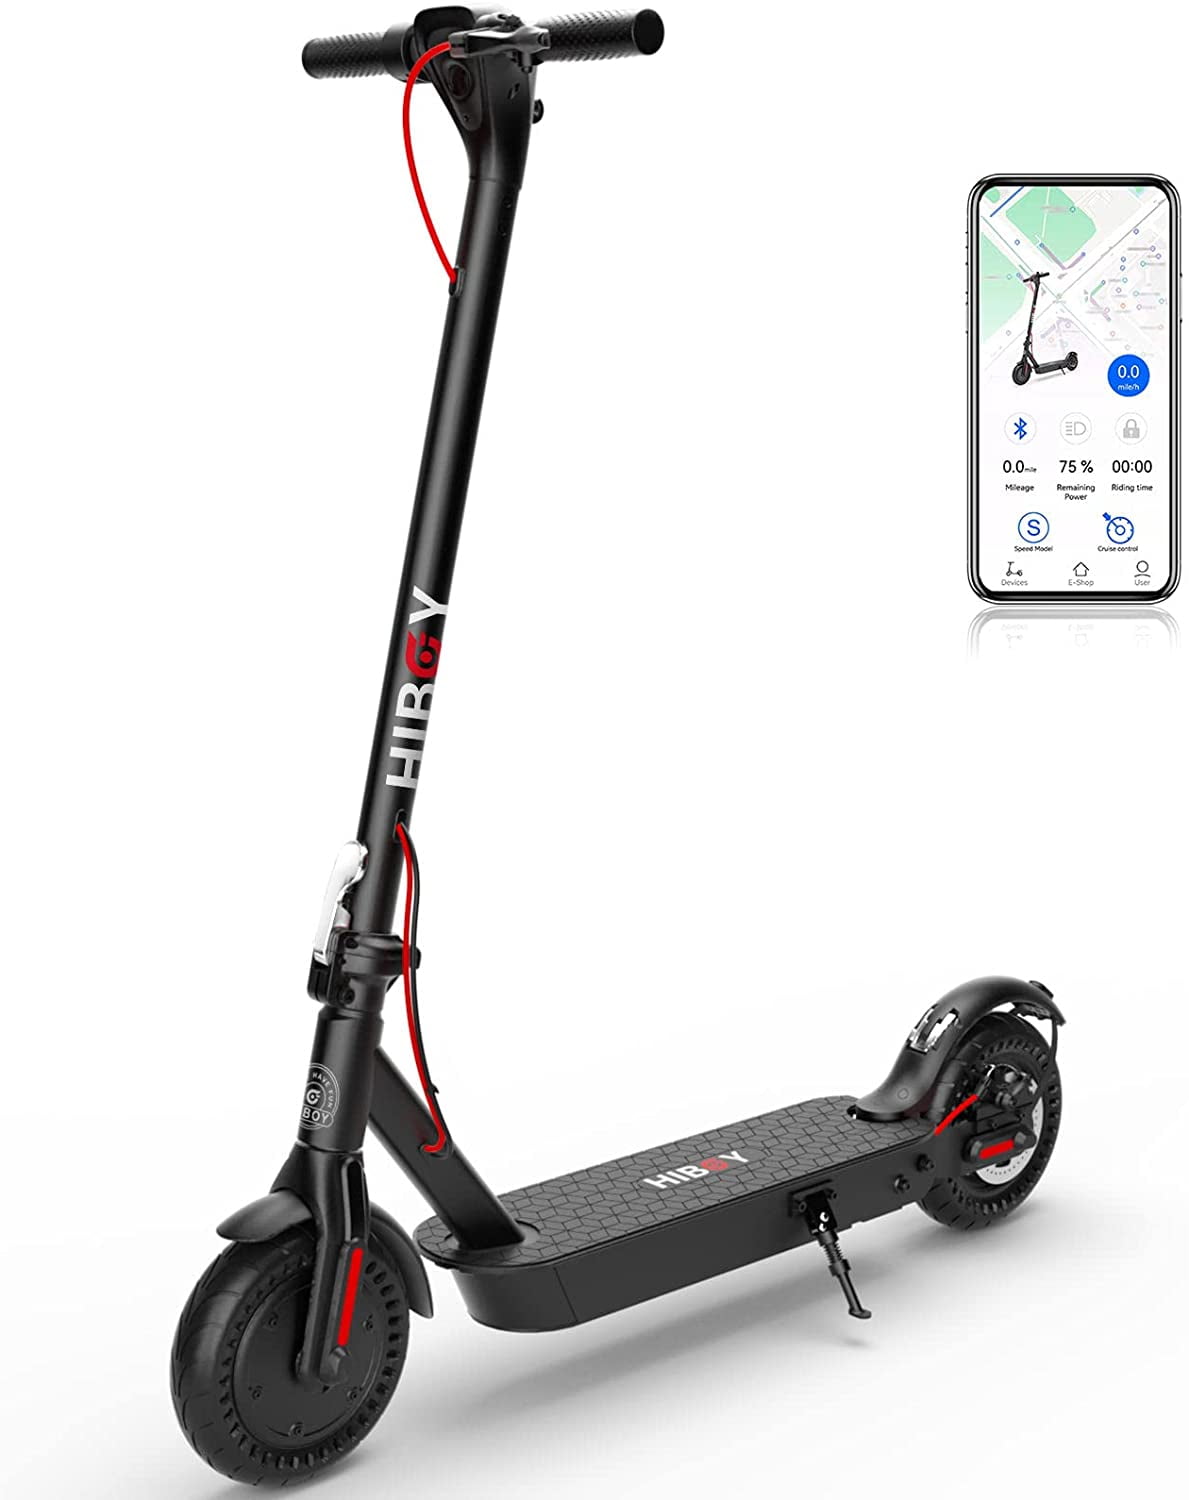 Hiboy KS4 Pro Electric Scooter, 500W Motor, 10" Honeycomb Tires Miles Long-Range & MPH Rear Suepension, Portable Foldable Commuting Electric Scooter for with APP and Double Braking System -